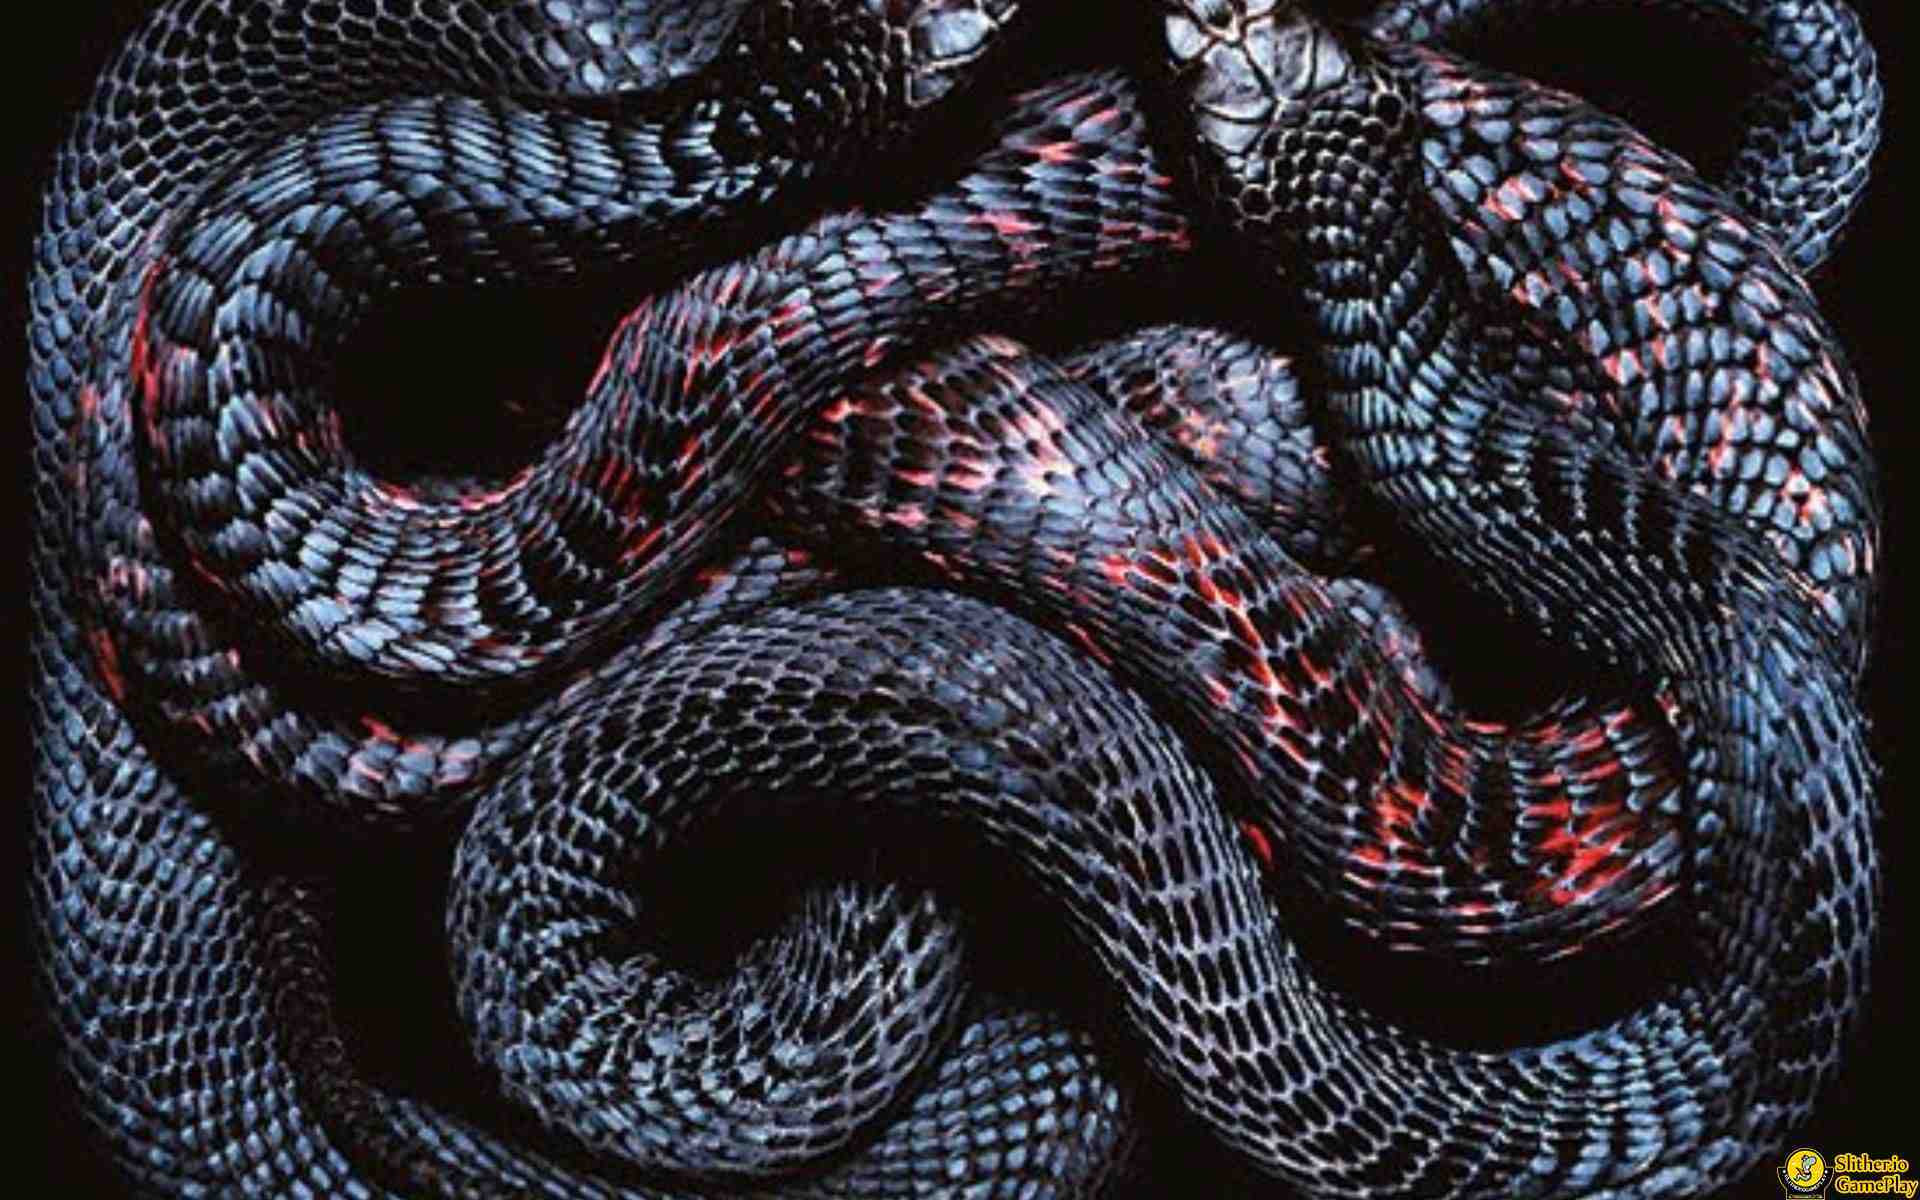 slither io wallpaper,snake,reptile,scaled reptile,serpent,colubridae